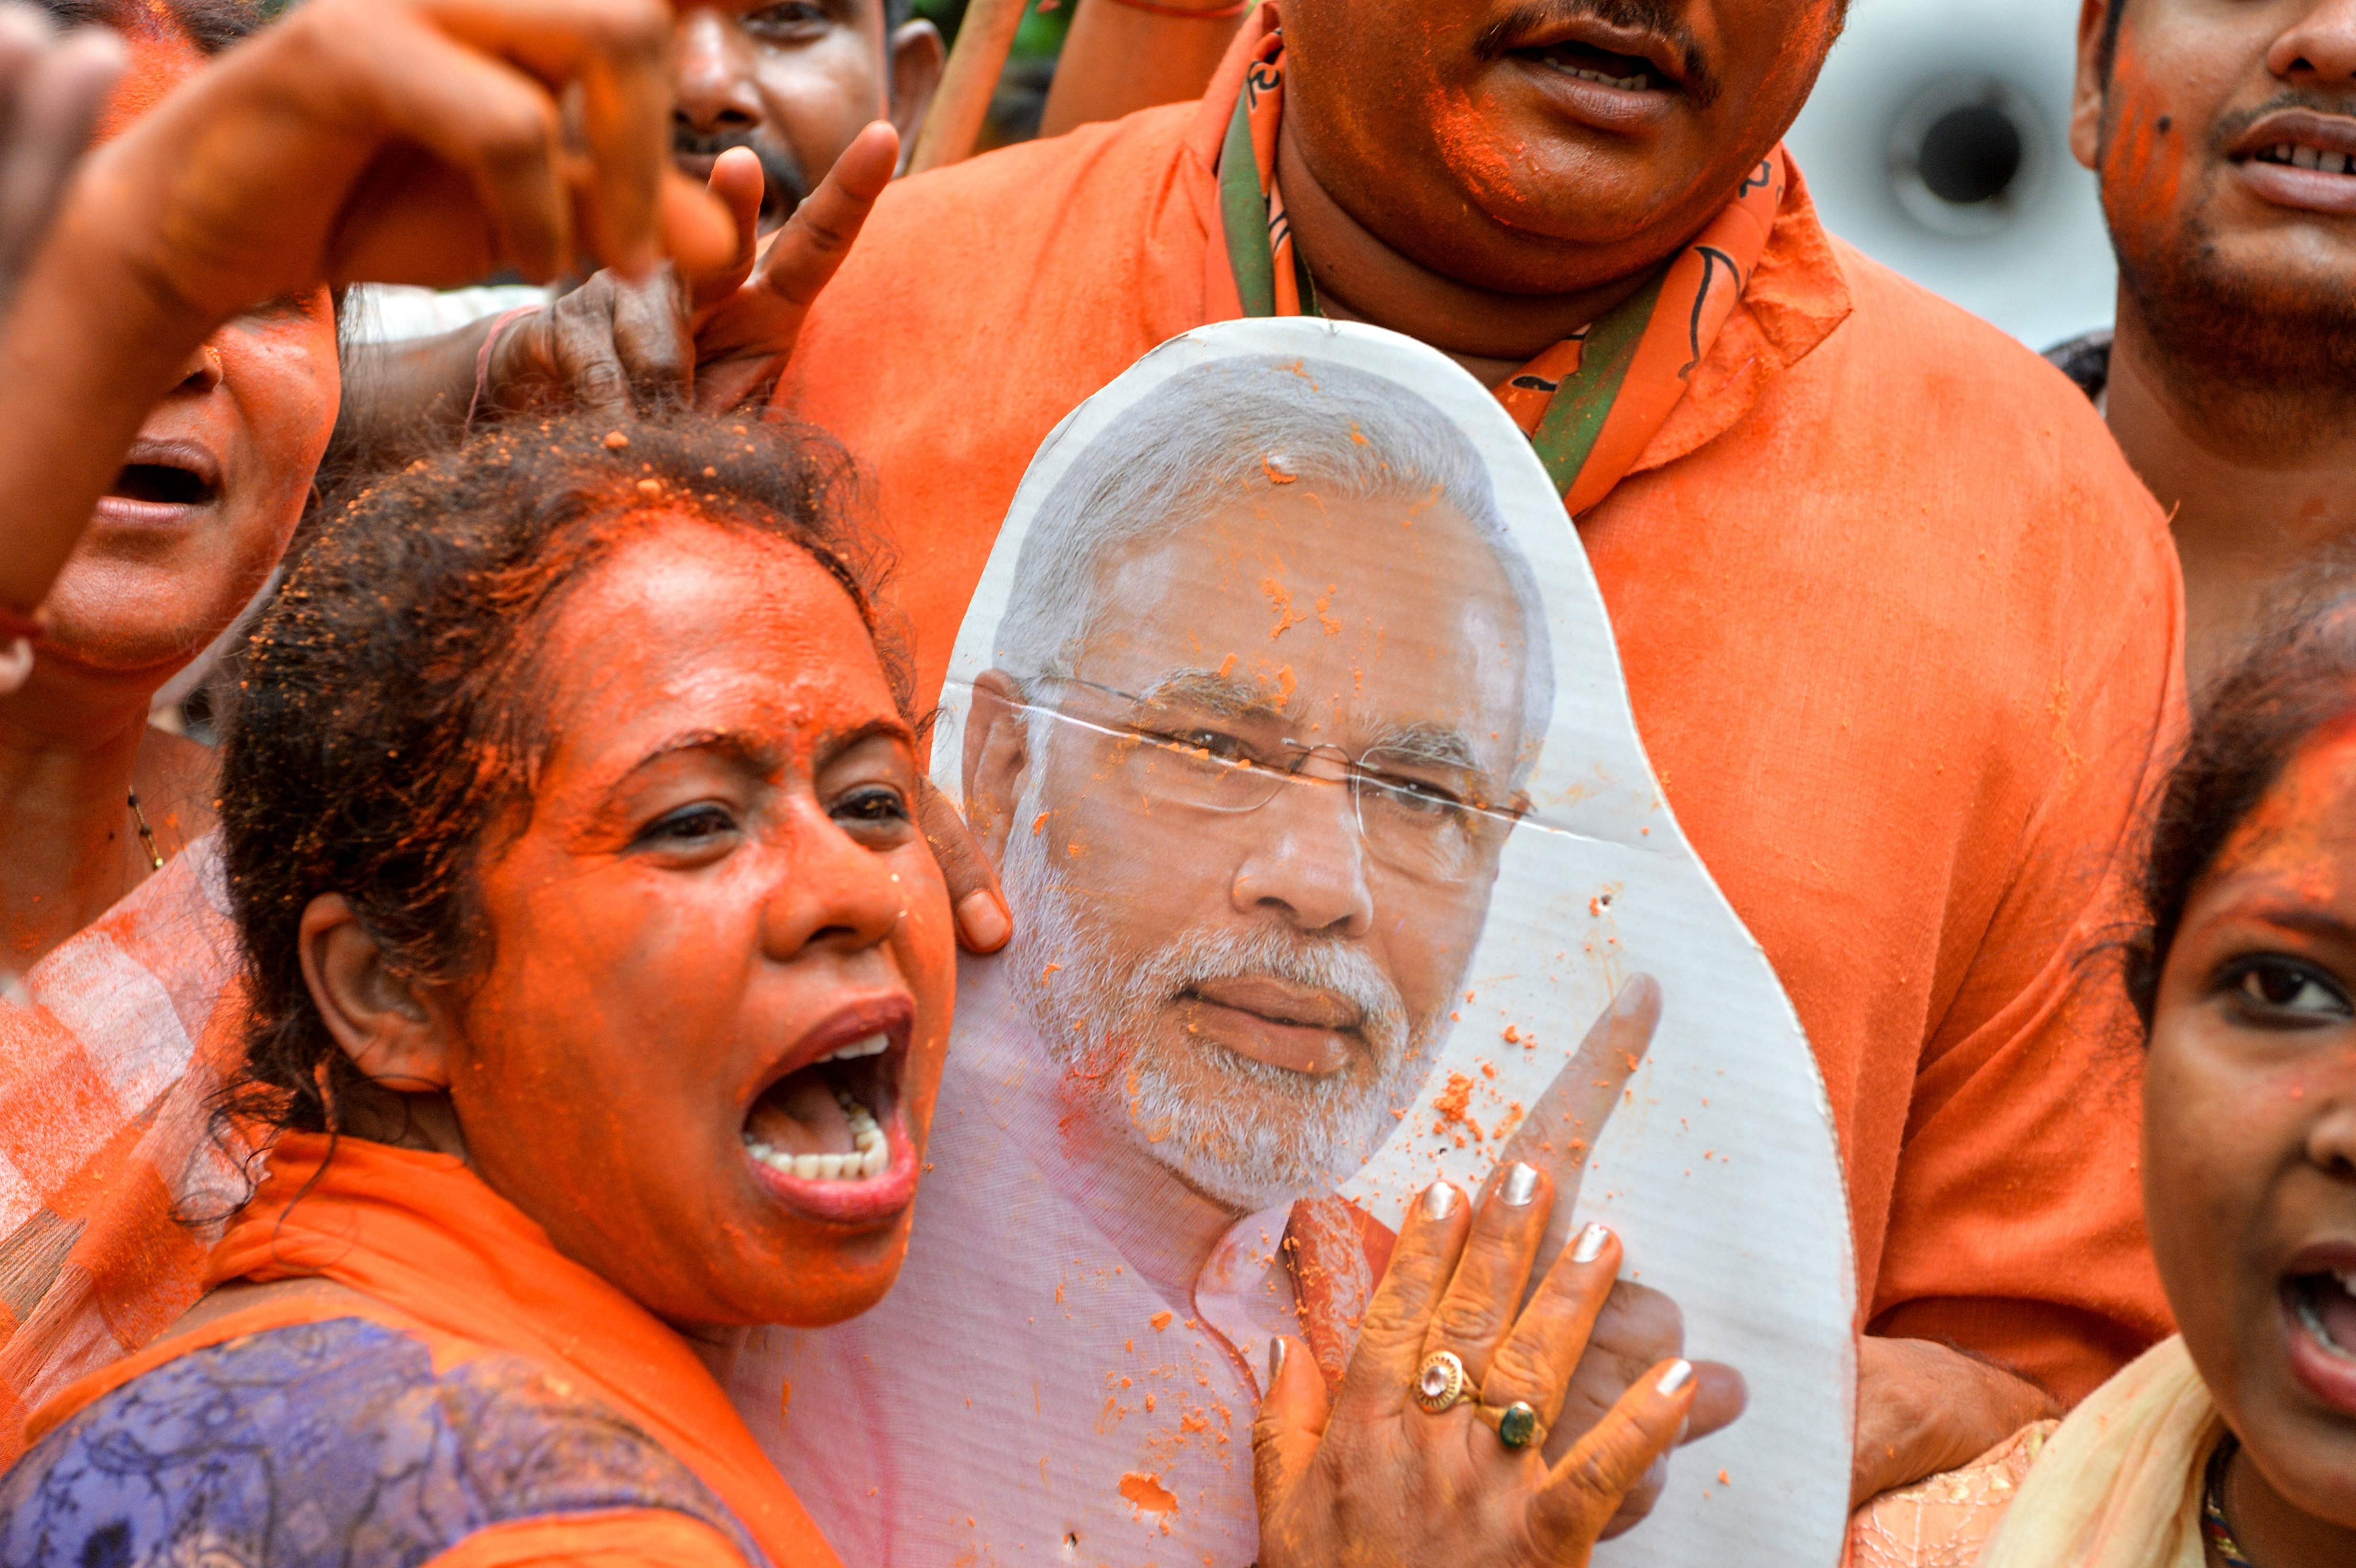 A Bharatiya Janata Party supporter shouts slogans with a cut-out of Indian Prime Minister Narendra Modi as she celebrates the election results in Siliguri on May 23, 2019. Credit: Diptendu Dutta/AFP